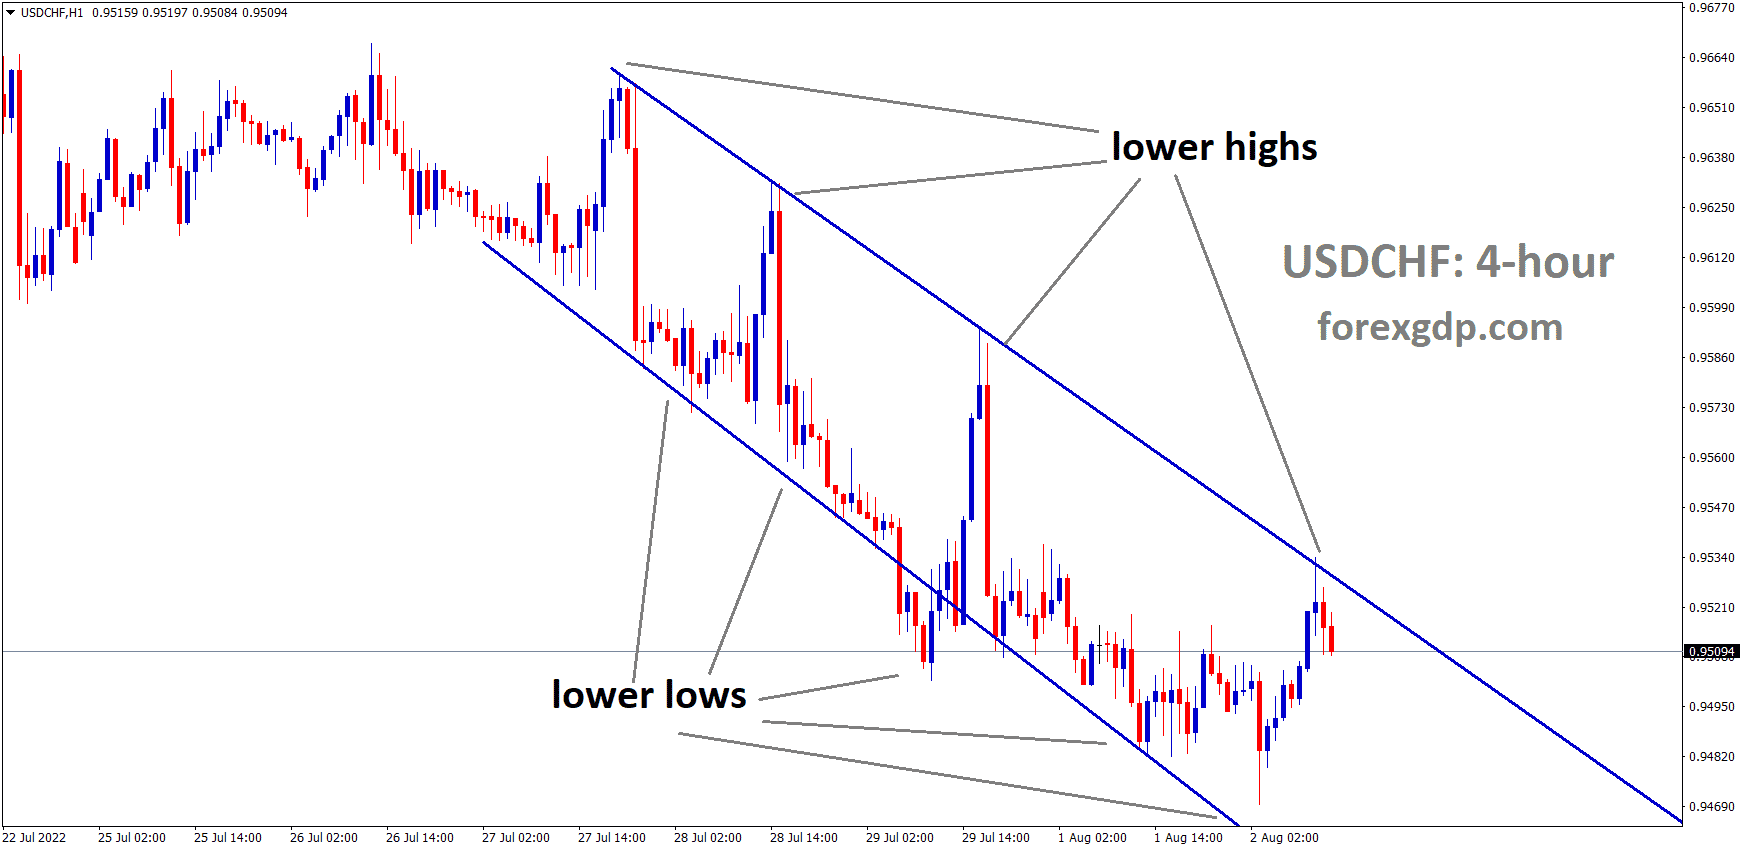 USDCHF is moving in the Descending channel and the Market has fallen from the Lower high area of the channel